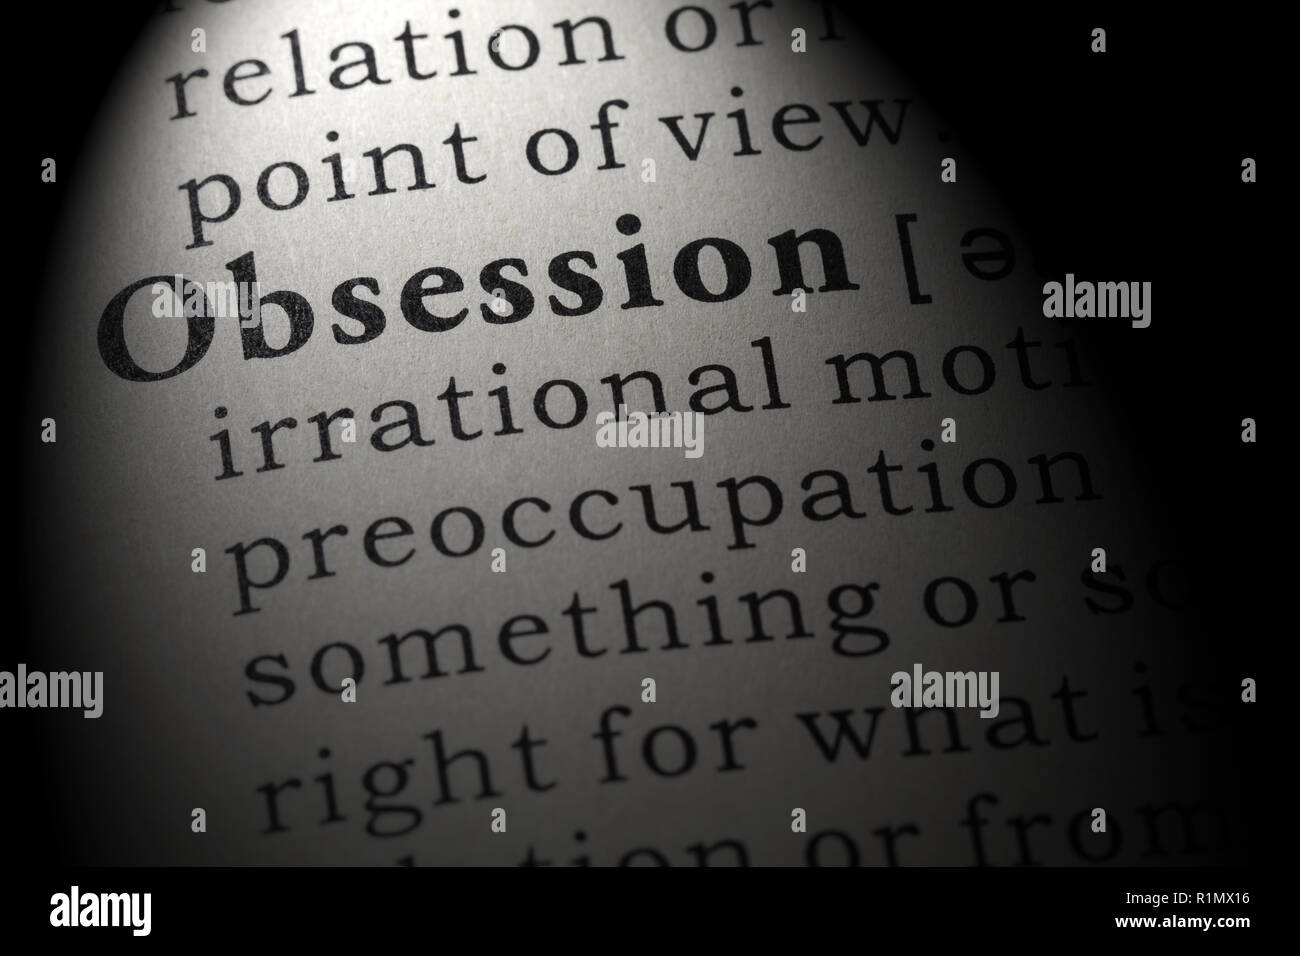 Fake Dictionary, Dictionary definition of the word obsession . including key descriptive words. Stock Photo